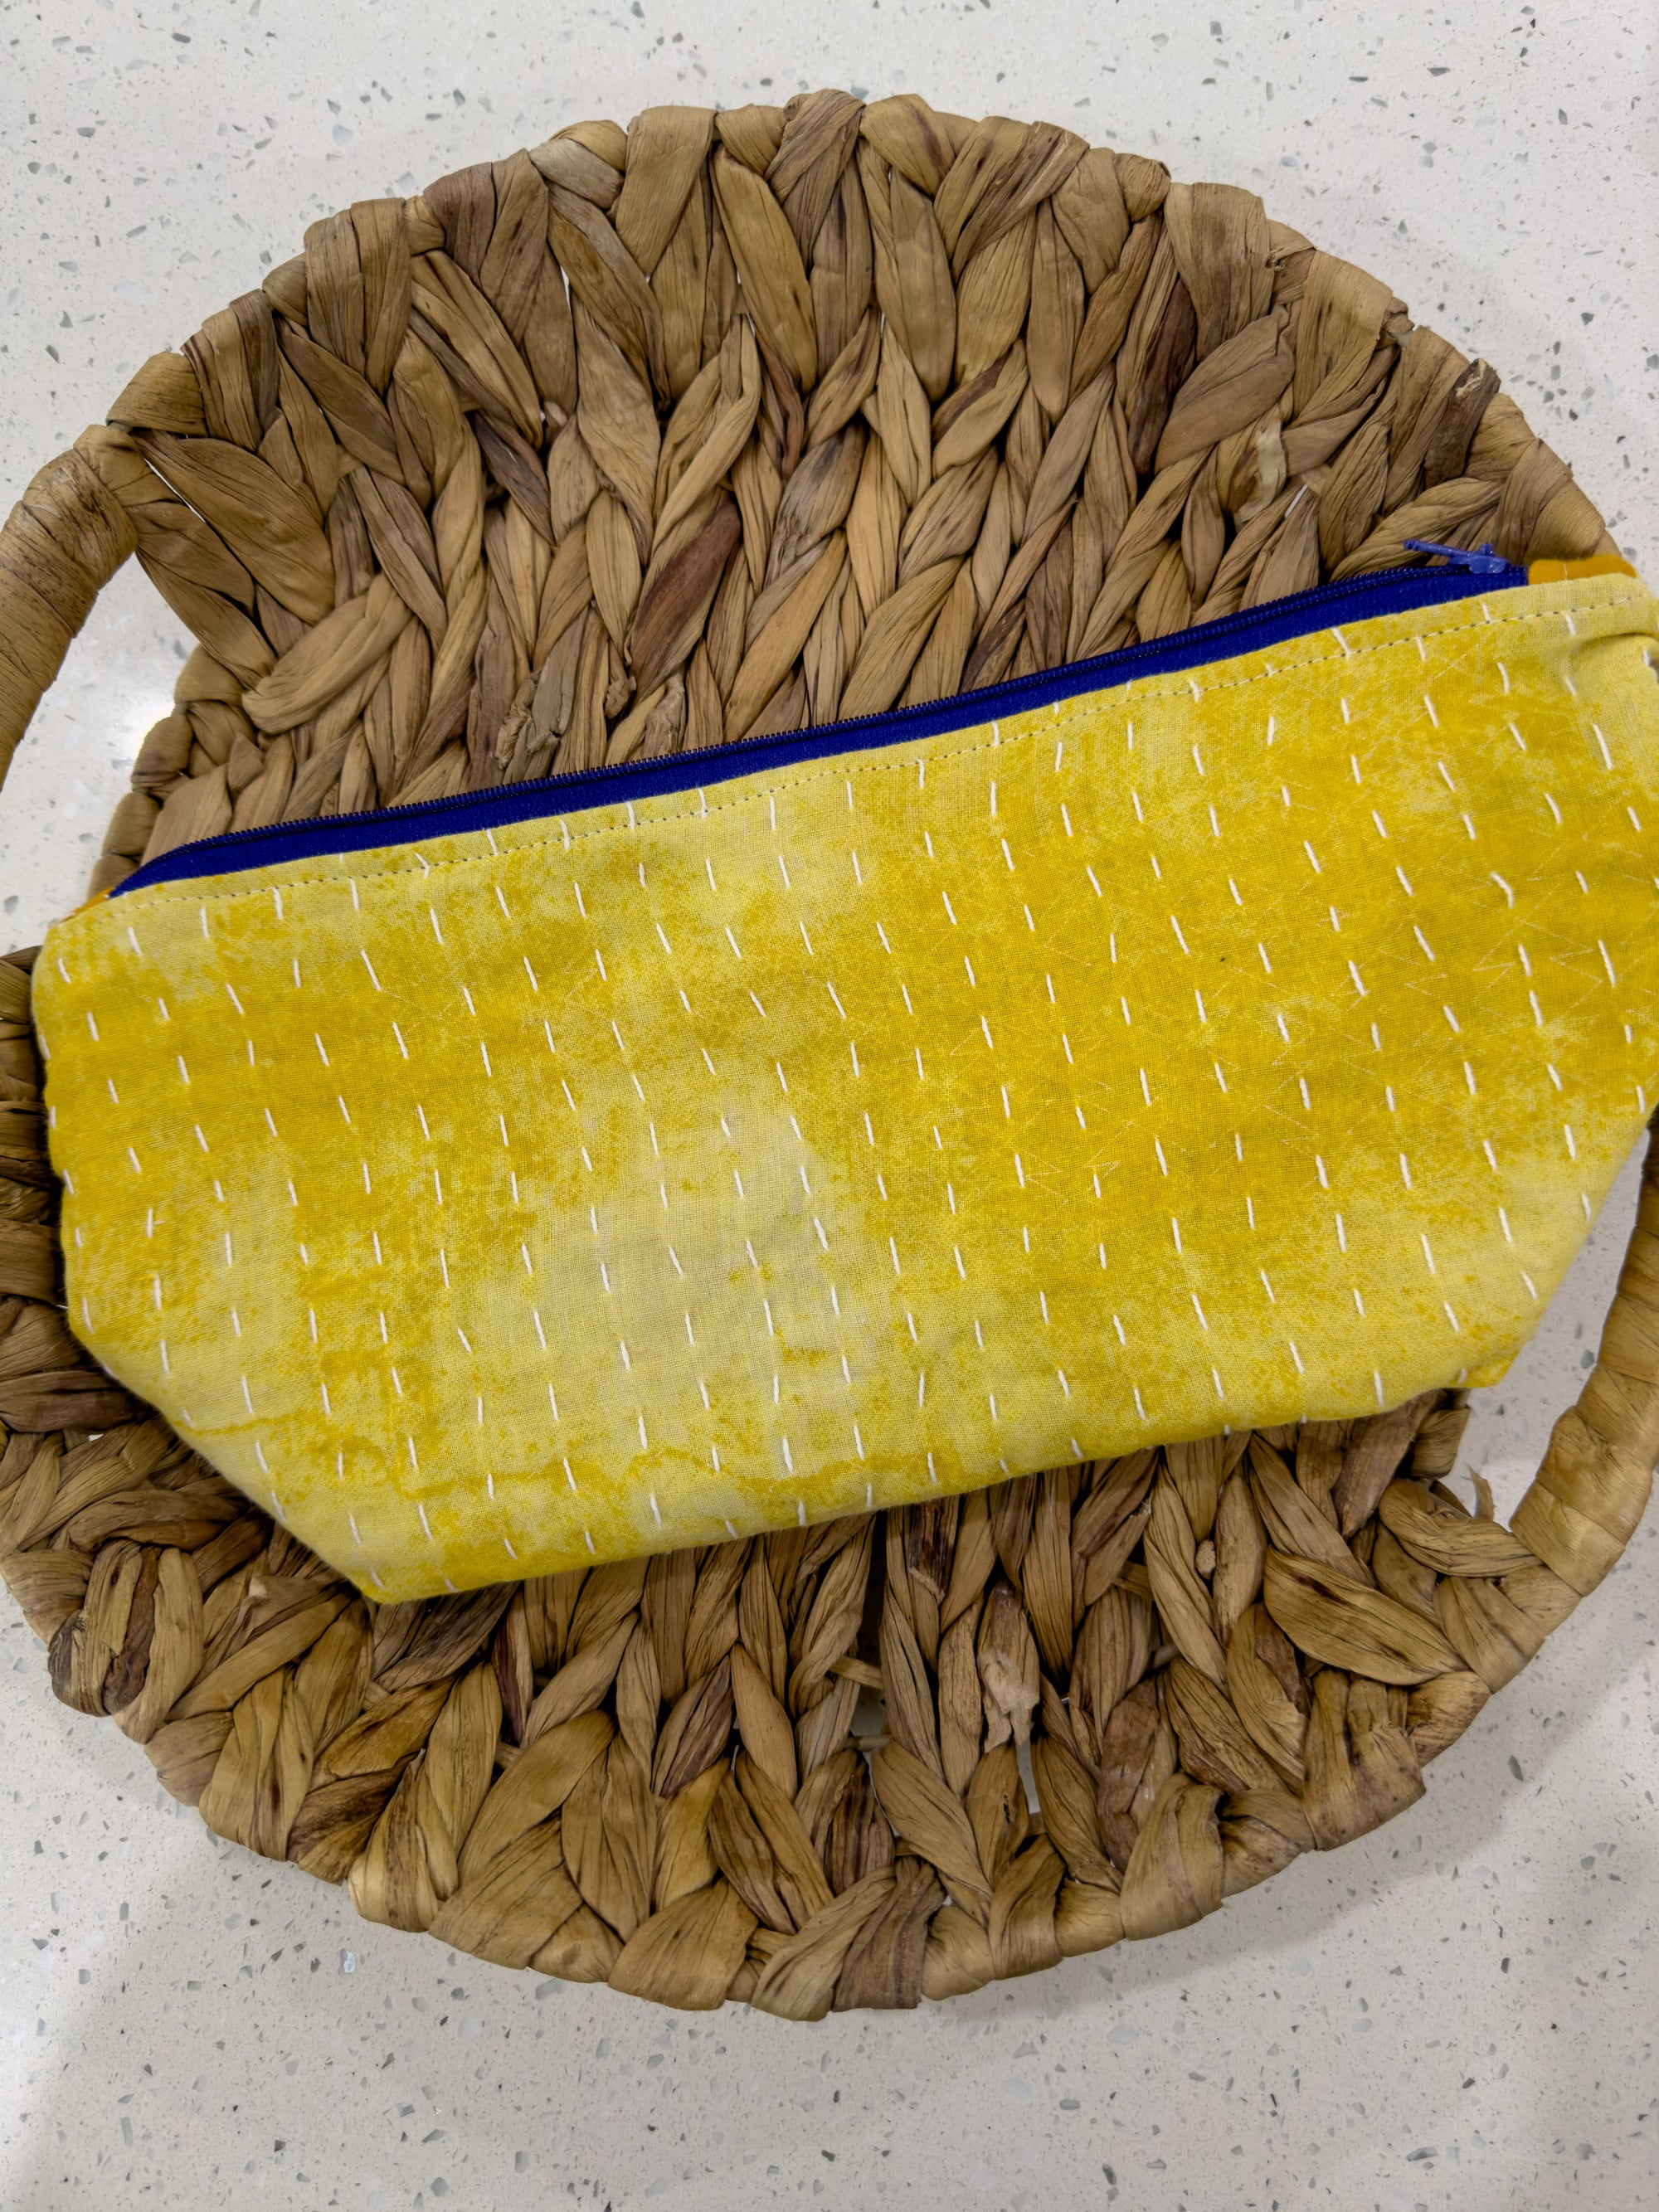 a yellow bag sitting on top of a woven basket